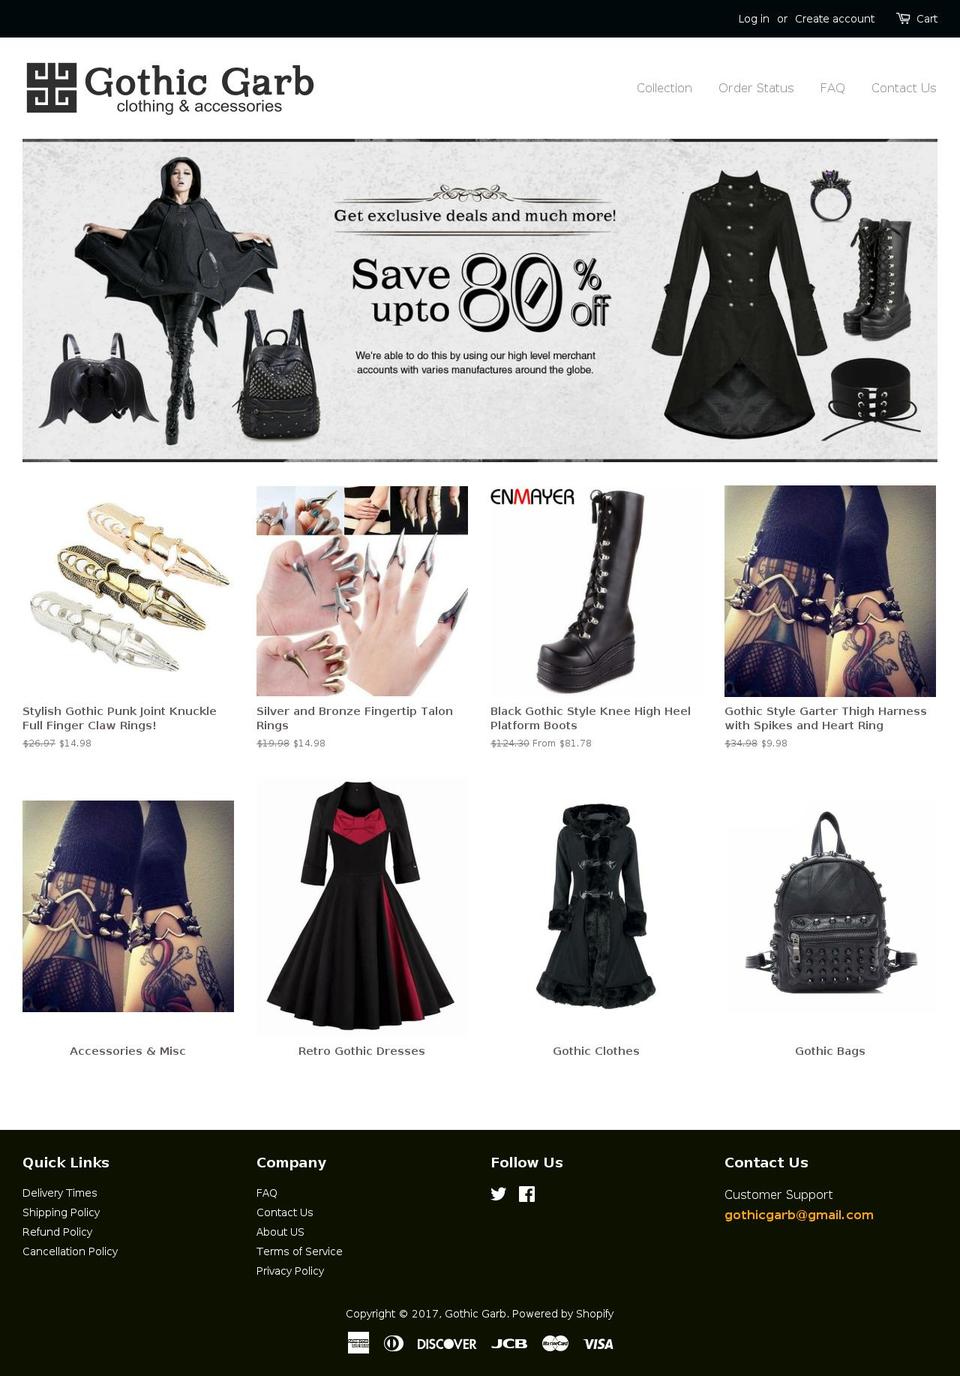 Boost Shopify theme site example gothicgarb.com